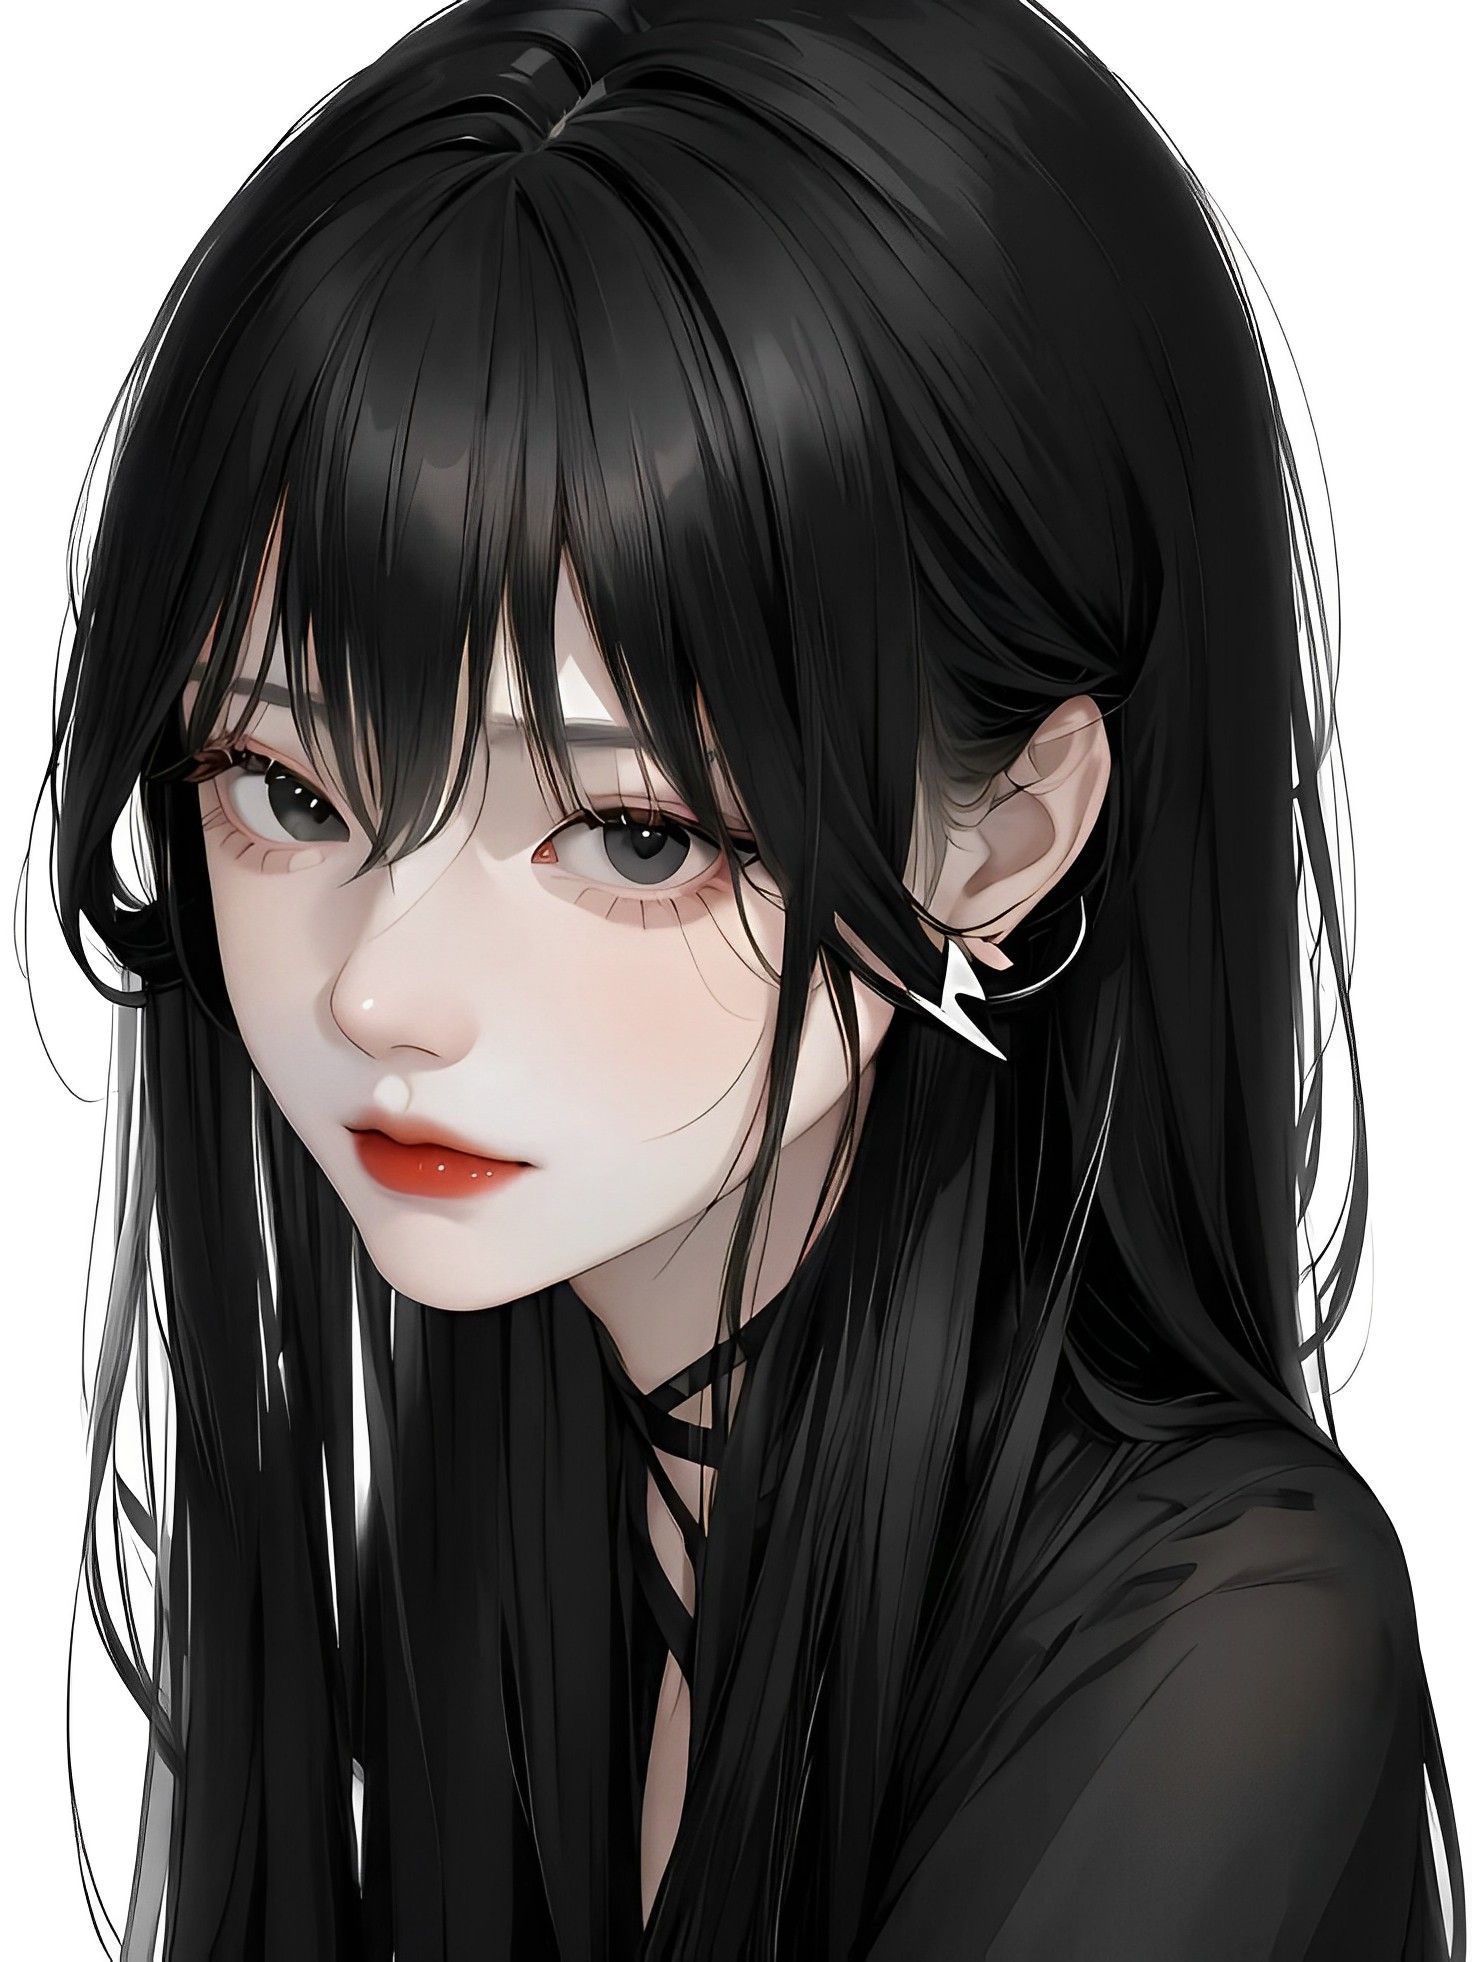 Anime girl with black straight hair - Wallpaper Cave